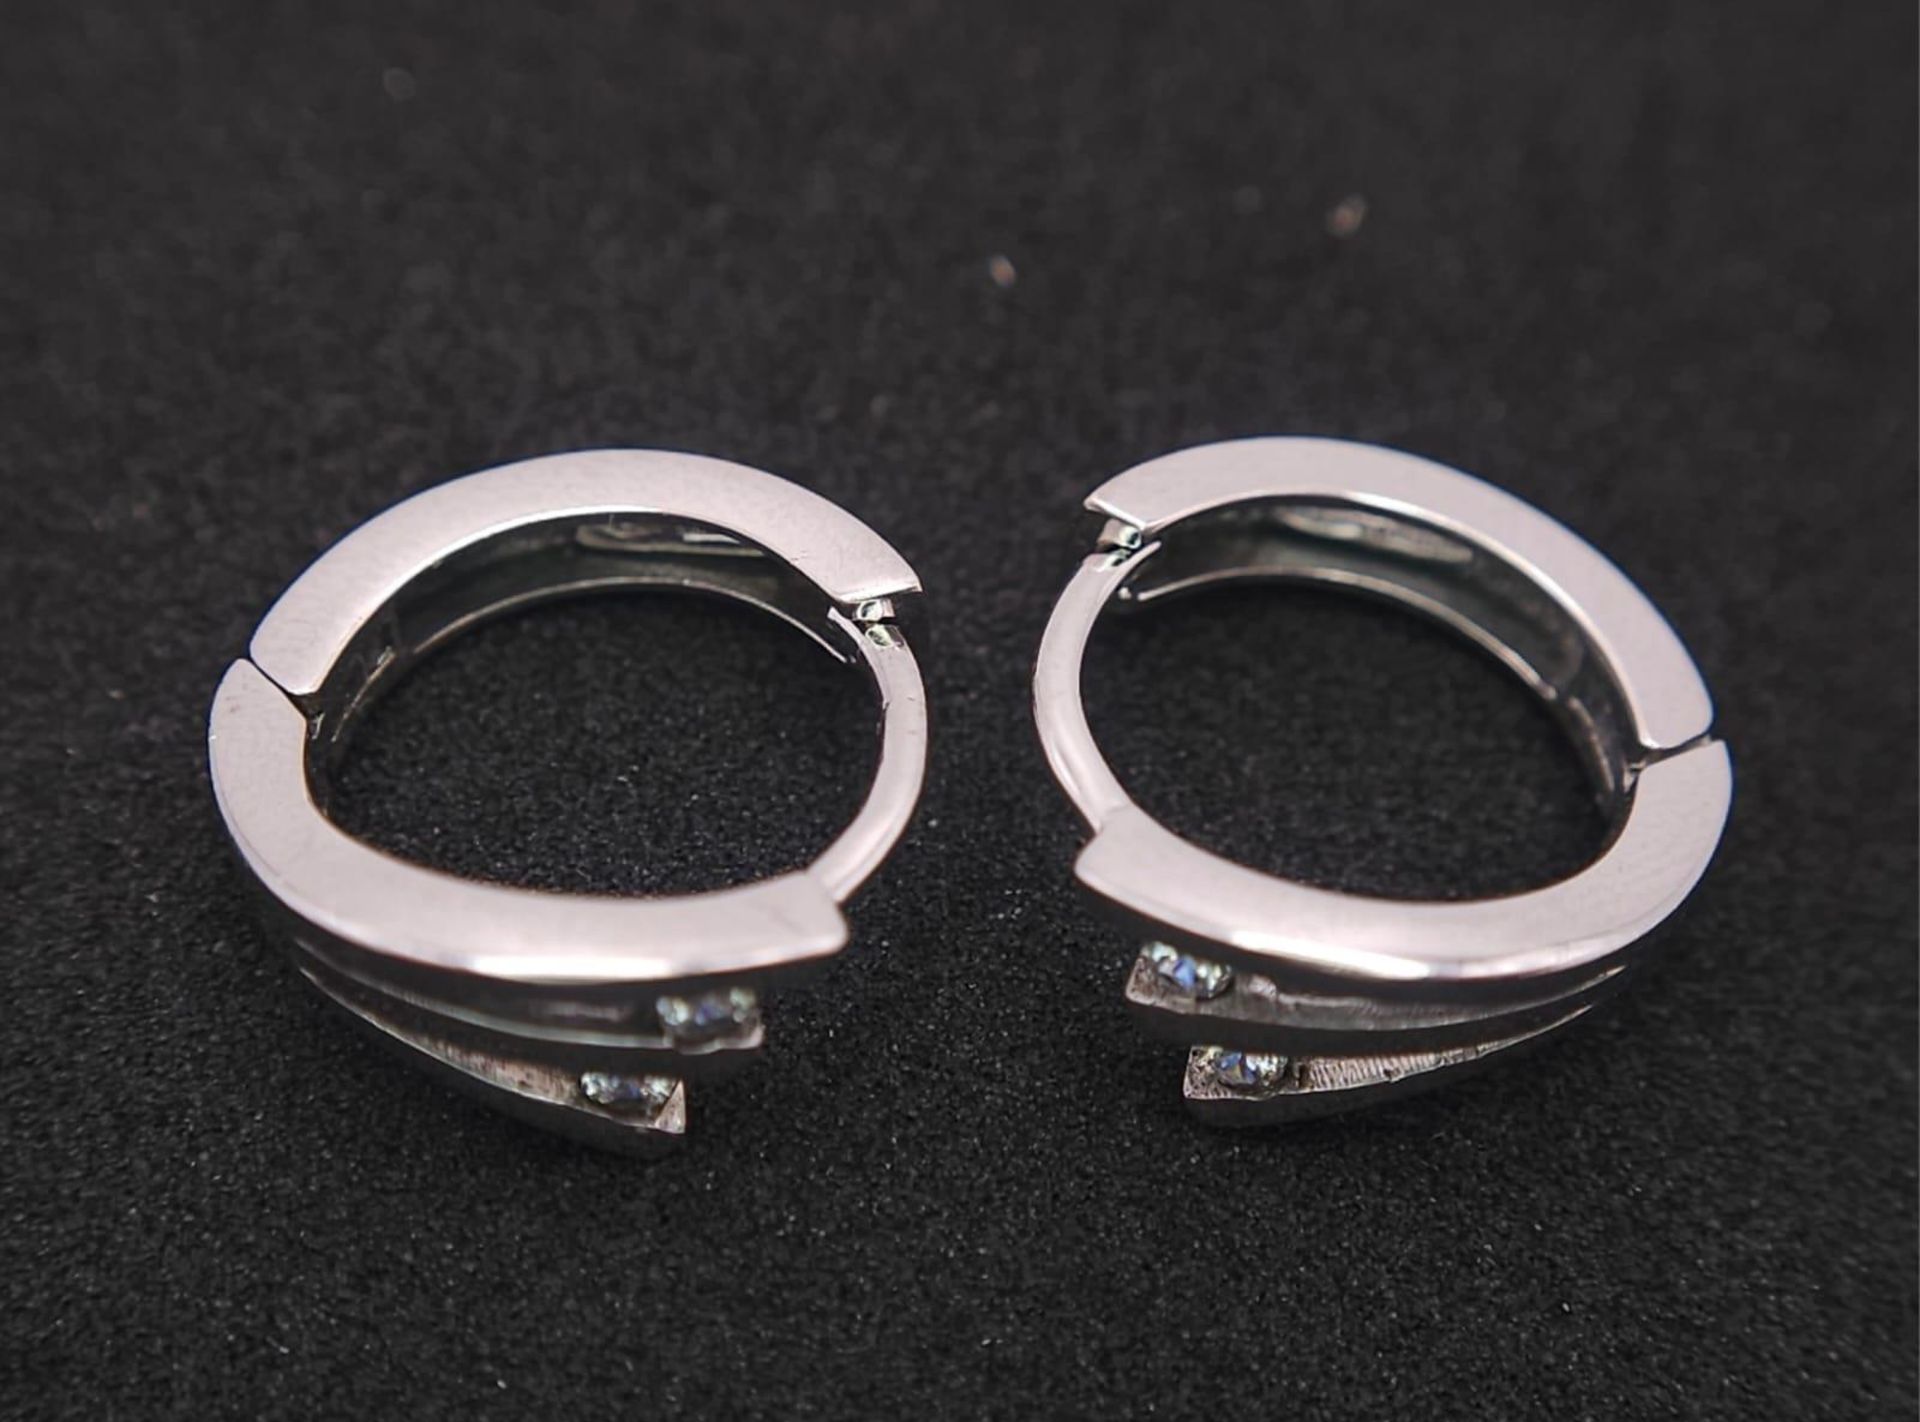 Pair of 18K White Gold CZ Mini Hoops earrings, 3.1g total weight - Image 6 of 10